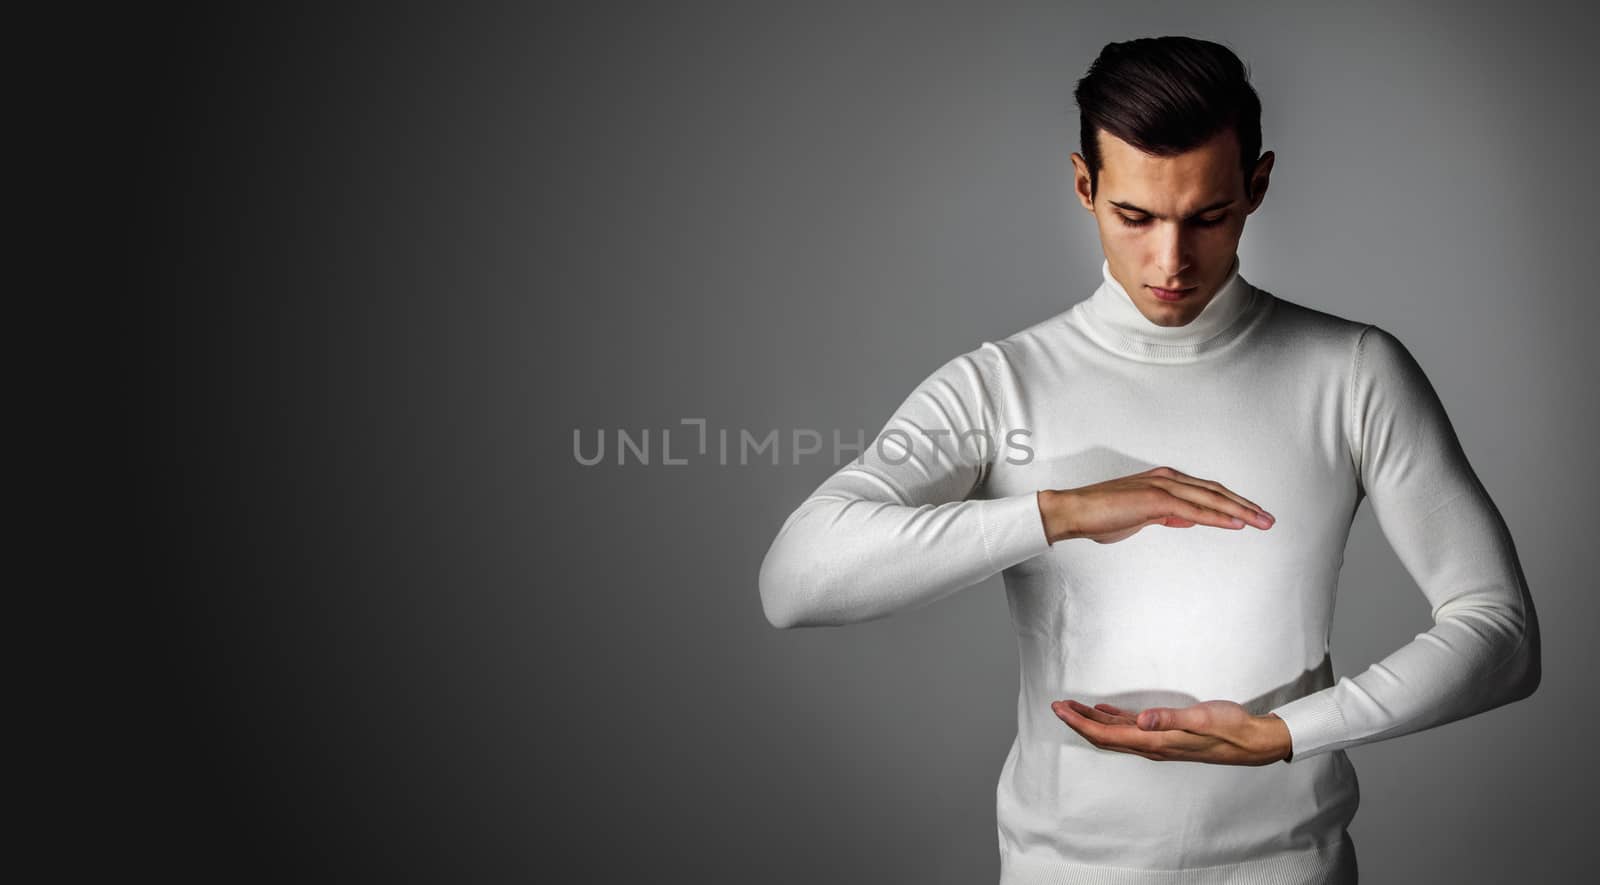 Innovation, future, futuristic object concept, man holding abstract glowing object, copy space for text design